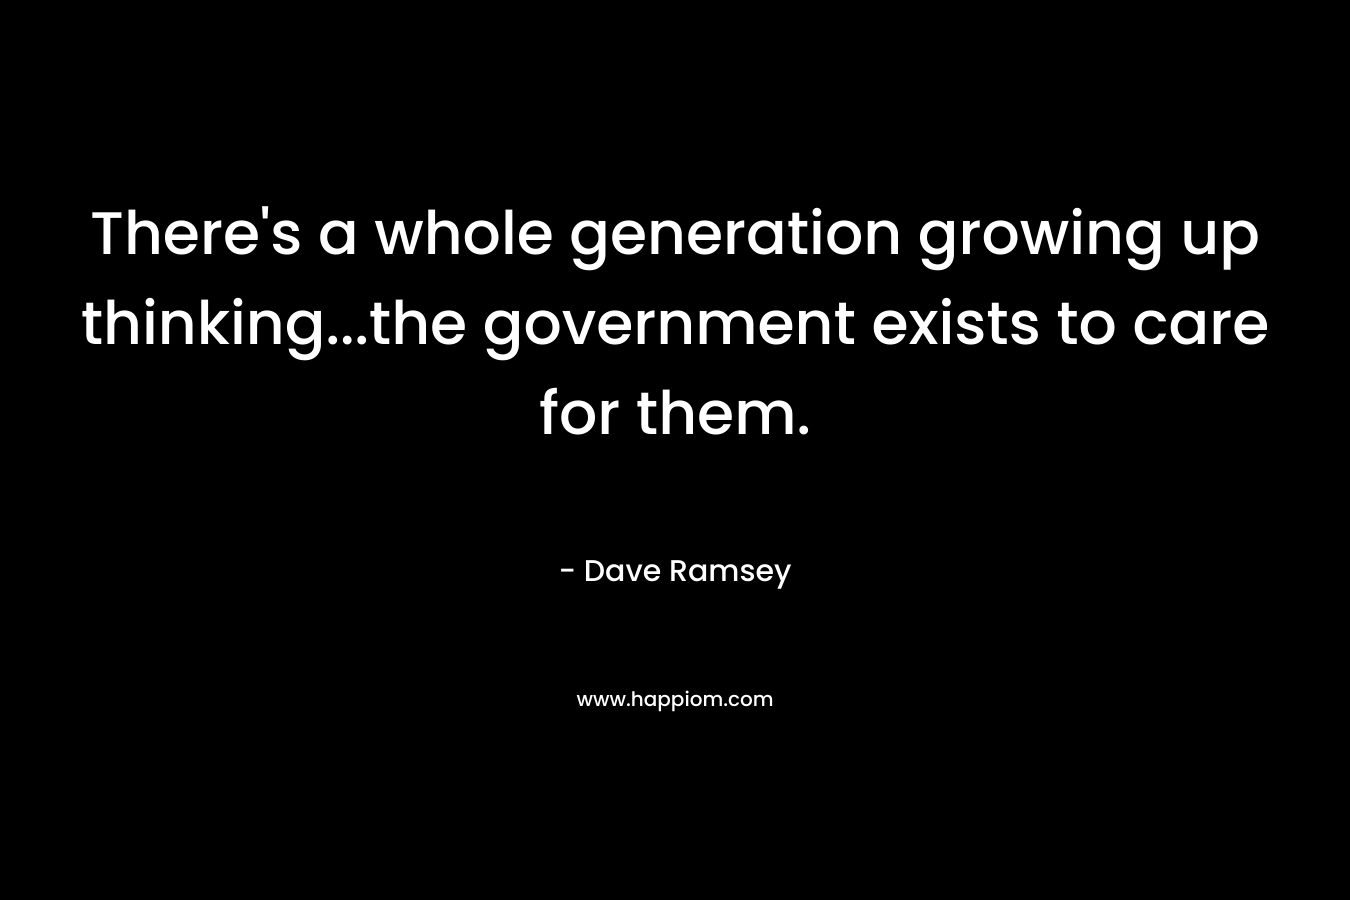 There’s a whole generation growing up thinking…the government exists to care for them. – Dave Ramsey